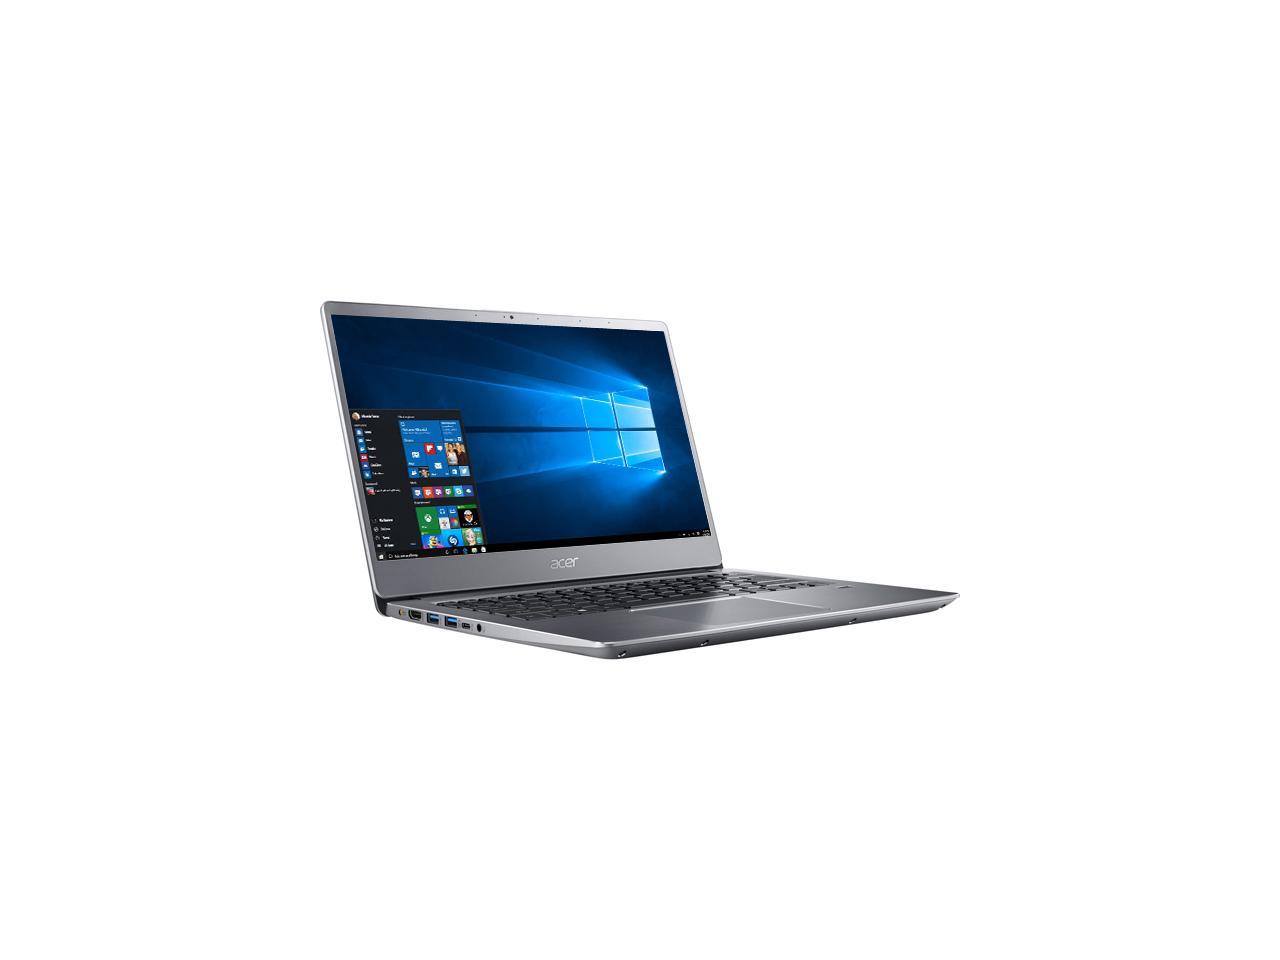 Acer Swift 3 SF314-54-39BH 14" LCD Notebook - Intel Core i3 (8th Gen) i3-8130U Dual-core (2 Core) 2.20 GHz - 4 GB DDR4 SDRAM - 128 GB SSD - Windows 10 Home in S mode 64-bit - 1920 x 1080 - In-plane Switching (IPS) Technology, ComfyView -...